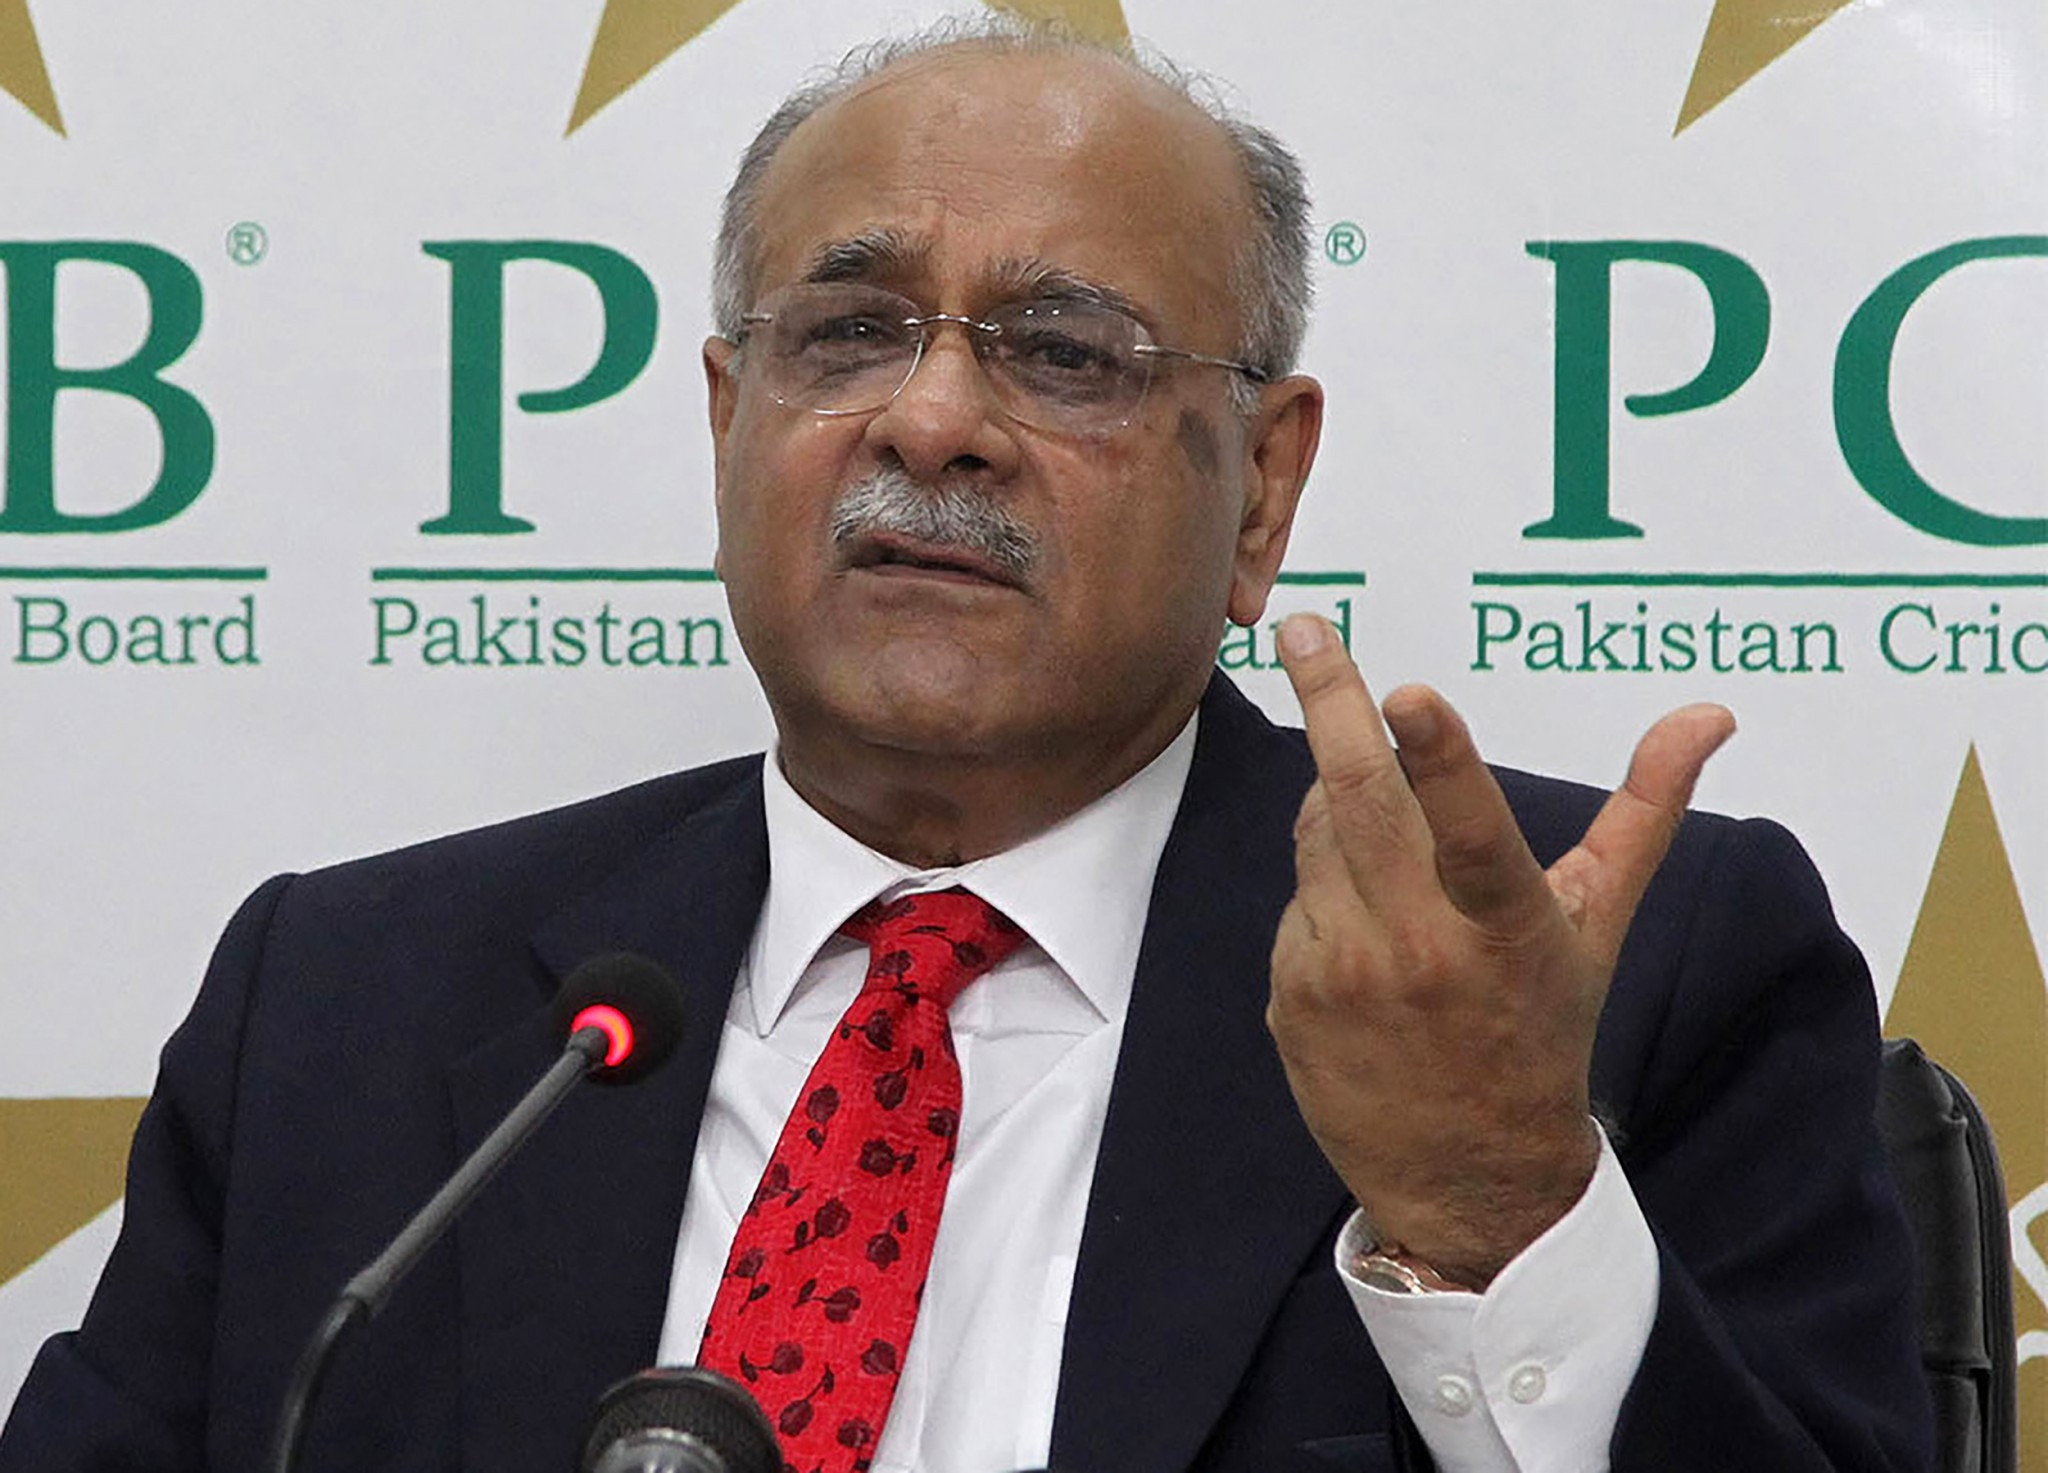 Pakistan Cricket Board chairman calls for patience over security situation